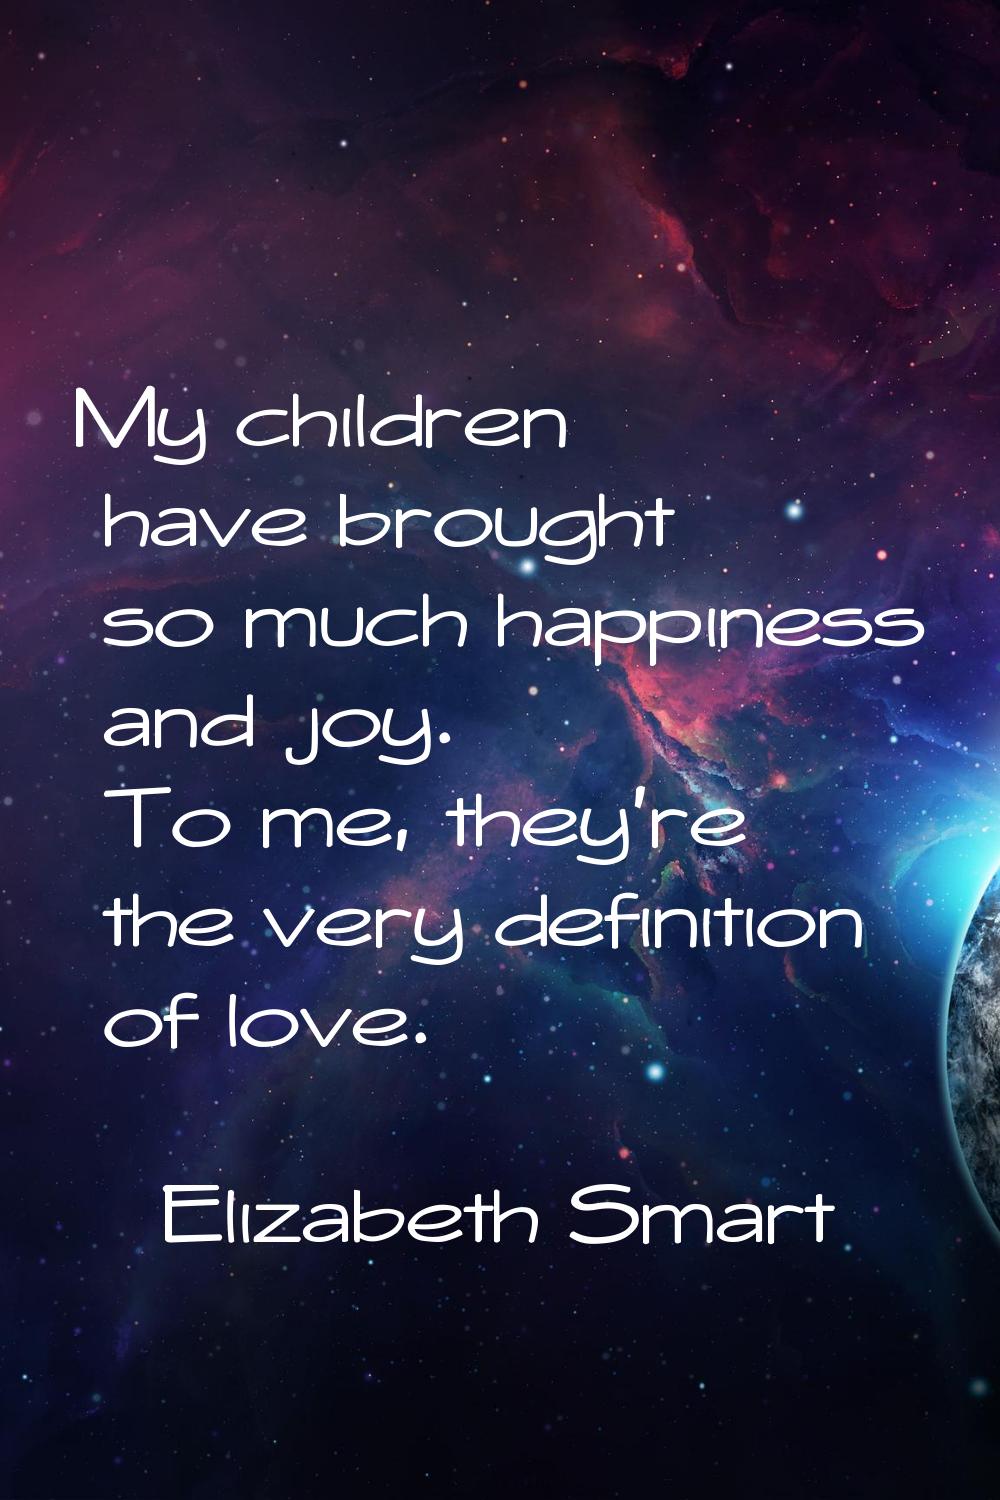 My children have brought so much happiness and joy. To me, they're the very definition of love.